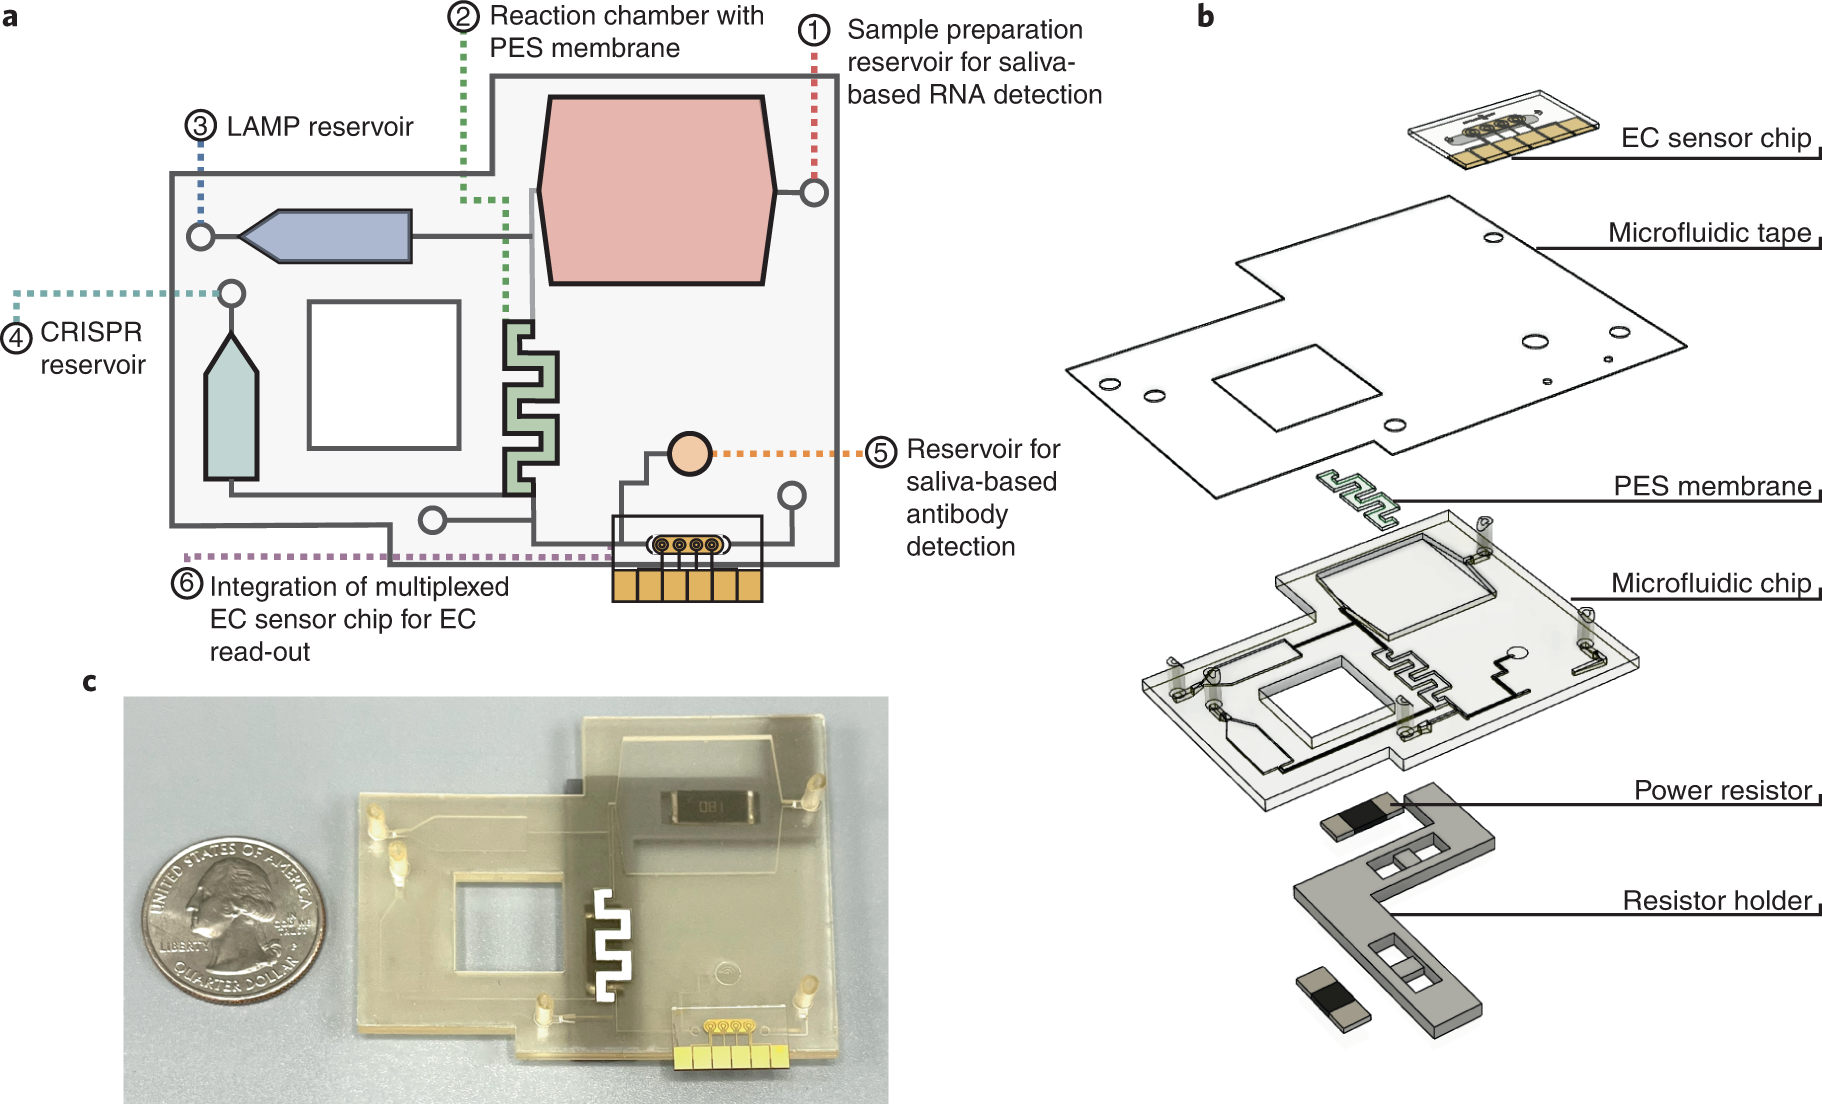 Smart laser cutter system detects different materials, MIT News